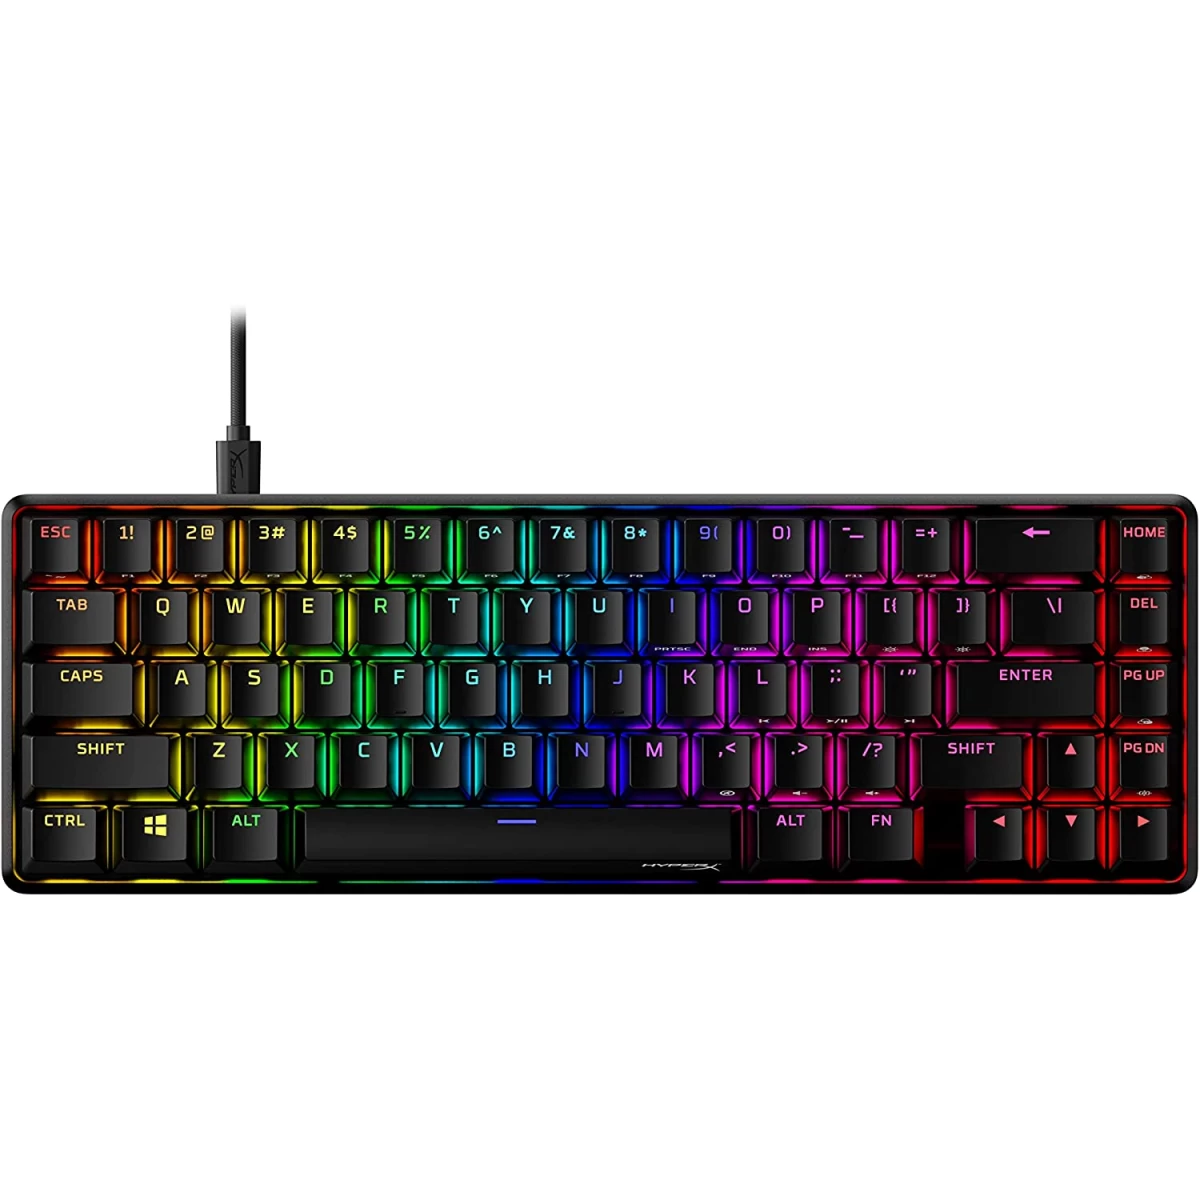 HyperX Alloy Origins 65 Mechanical Gaming Keyboard Compact 65% Form Factor Linear Red Switch Double Shot PBT KeycapsCompact 65% form factorAircraft-grade aluminum bodyDouble shot PBT keycapsHyperX Mechanical switchesRGB backlit keysCustomize with HyperX N